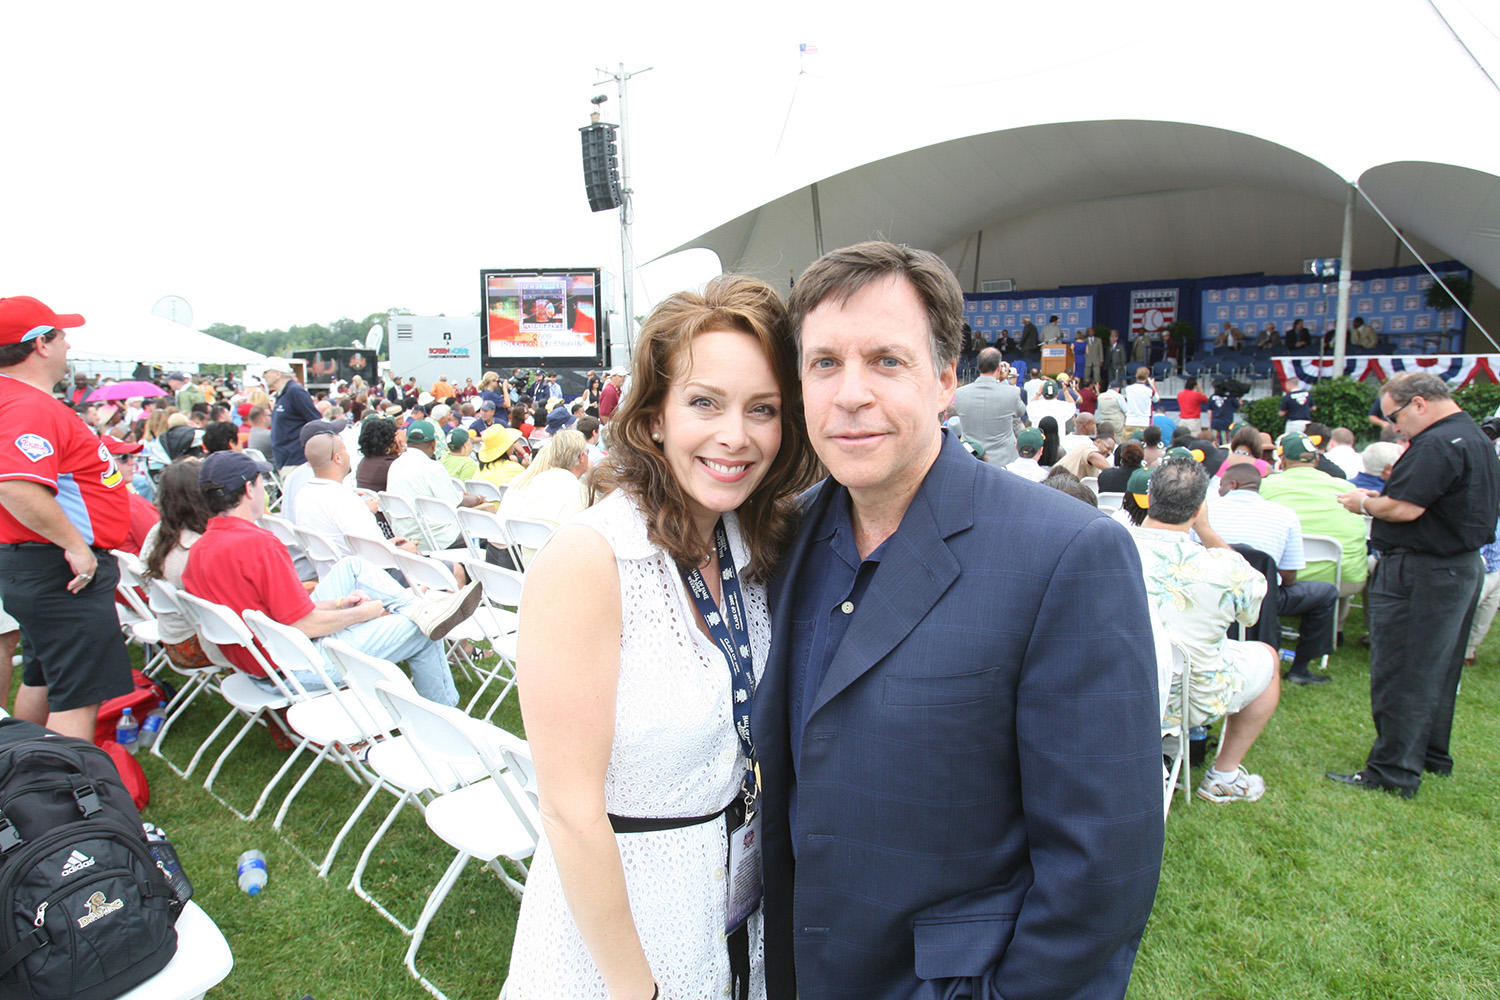 Bob Costas Poses With His Wife At The 2009 Induction Ceremony During Hall Of Fame Weekend (Source: 